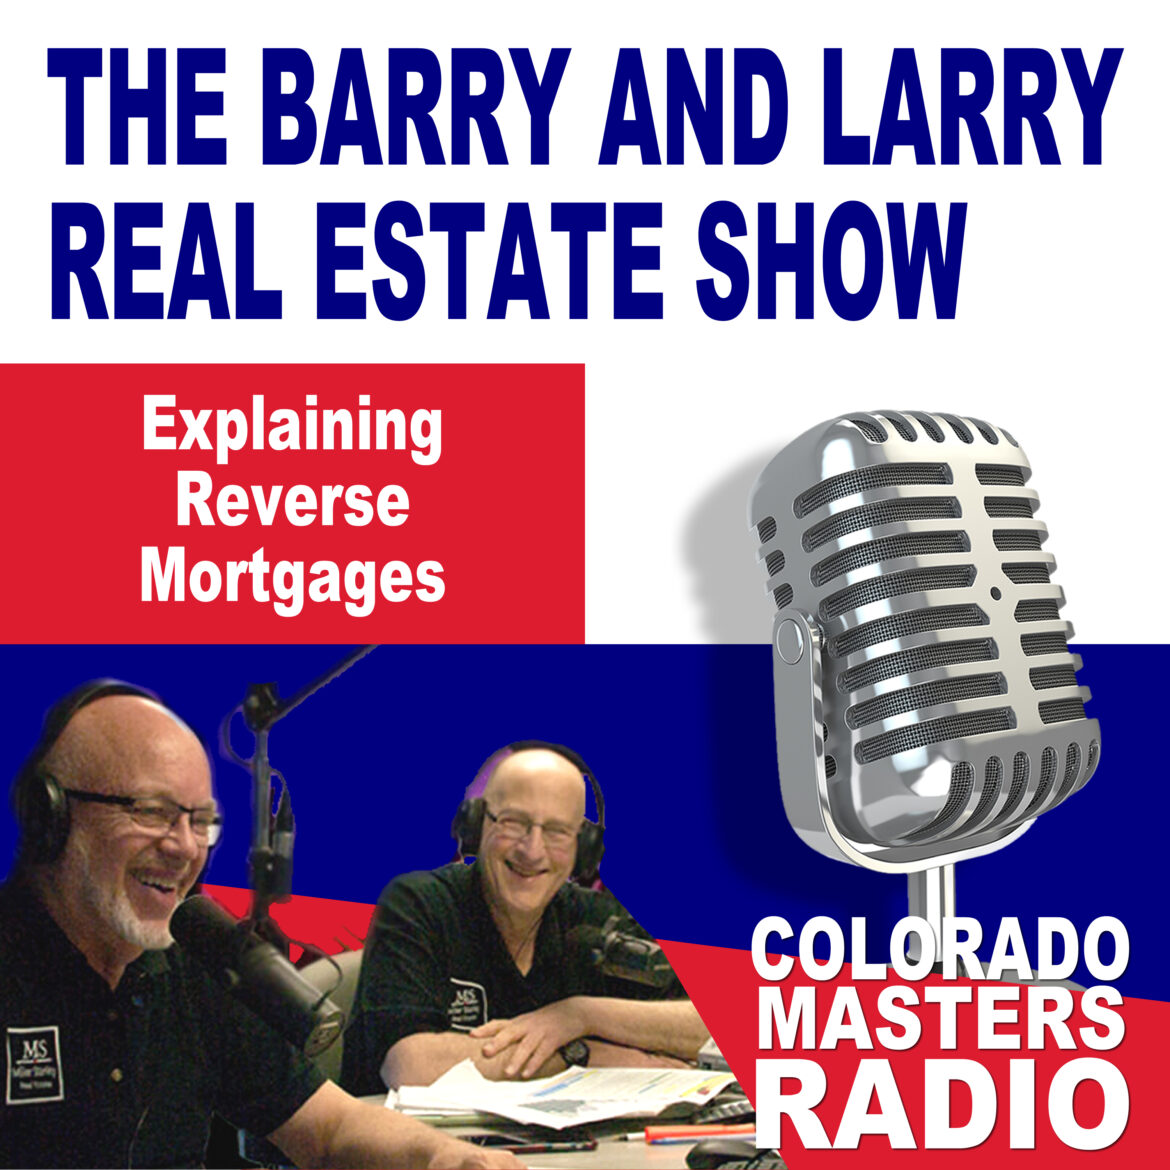 The Larry and Barry Real Estate Show - Explaining Reverse Mortgages